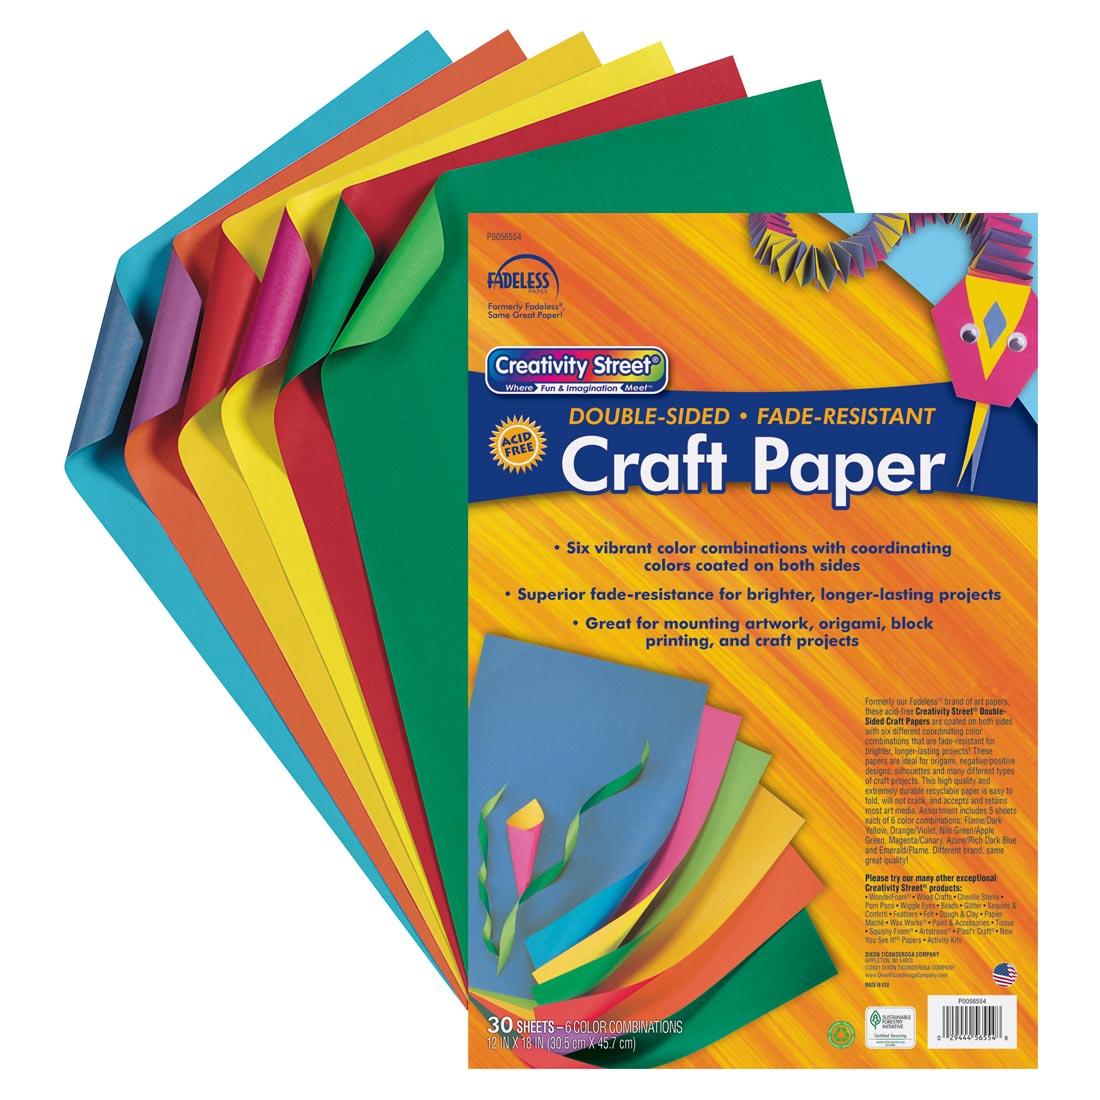 Creativity Street Double-Sided Craft Paper